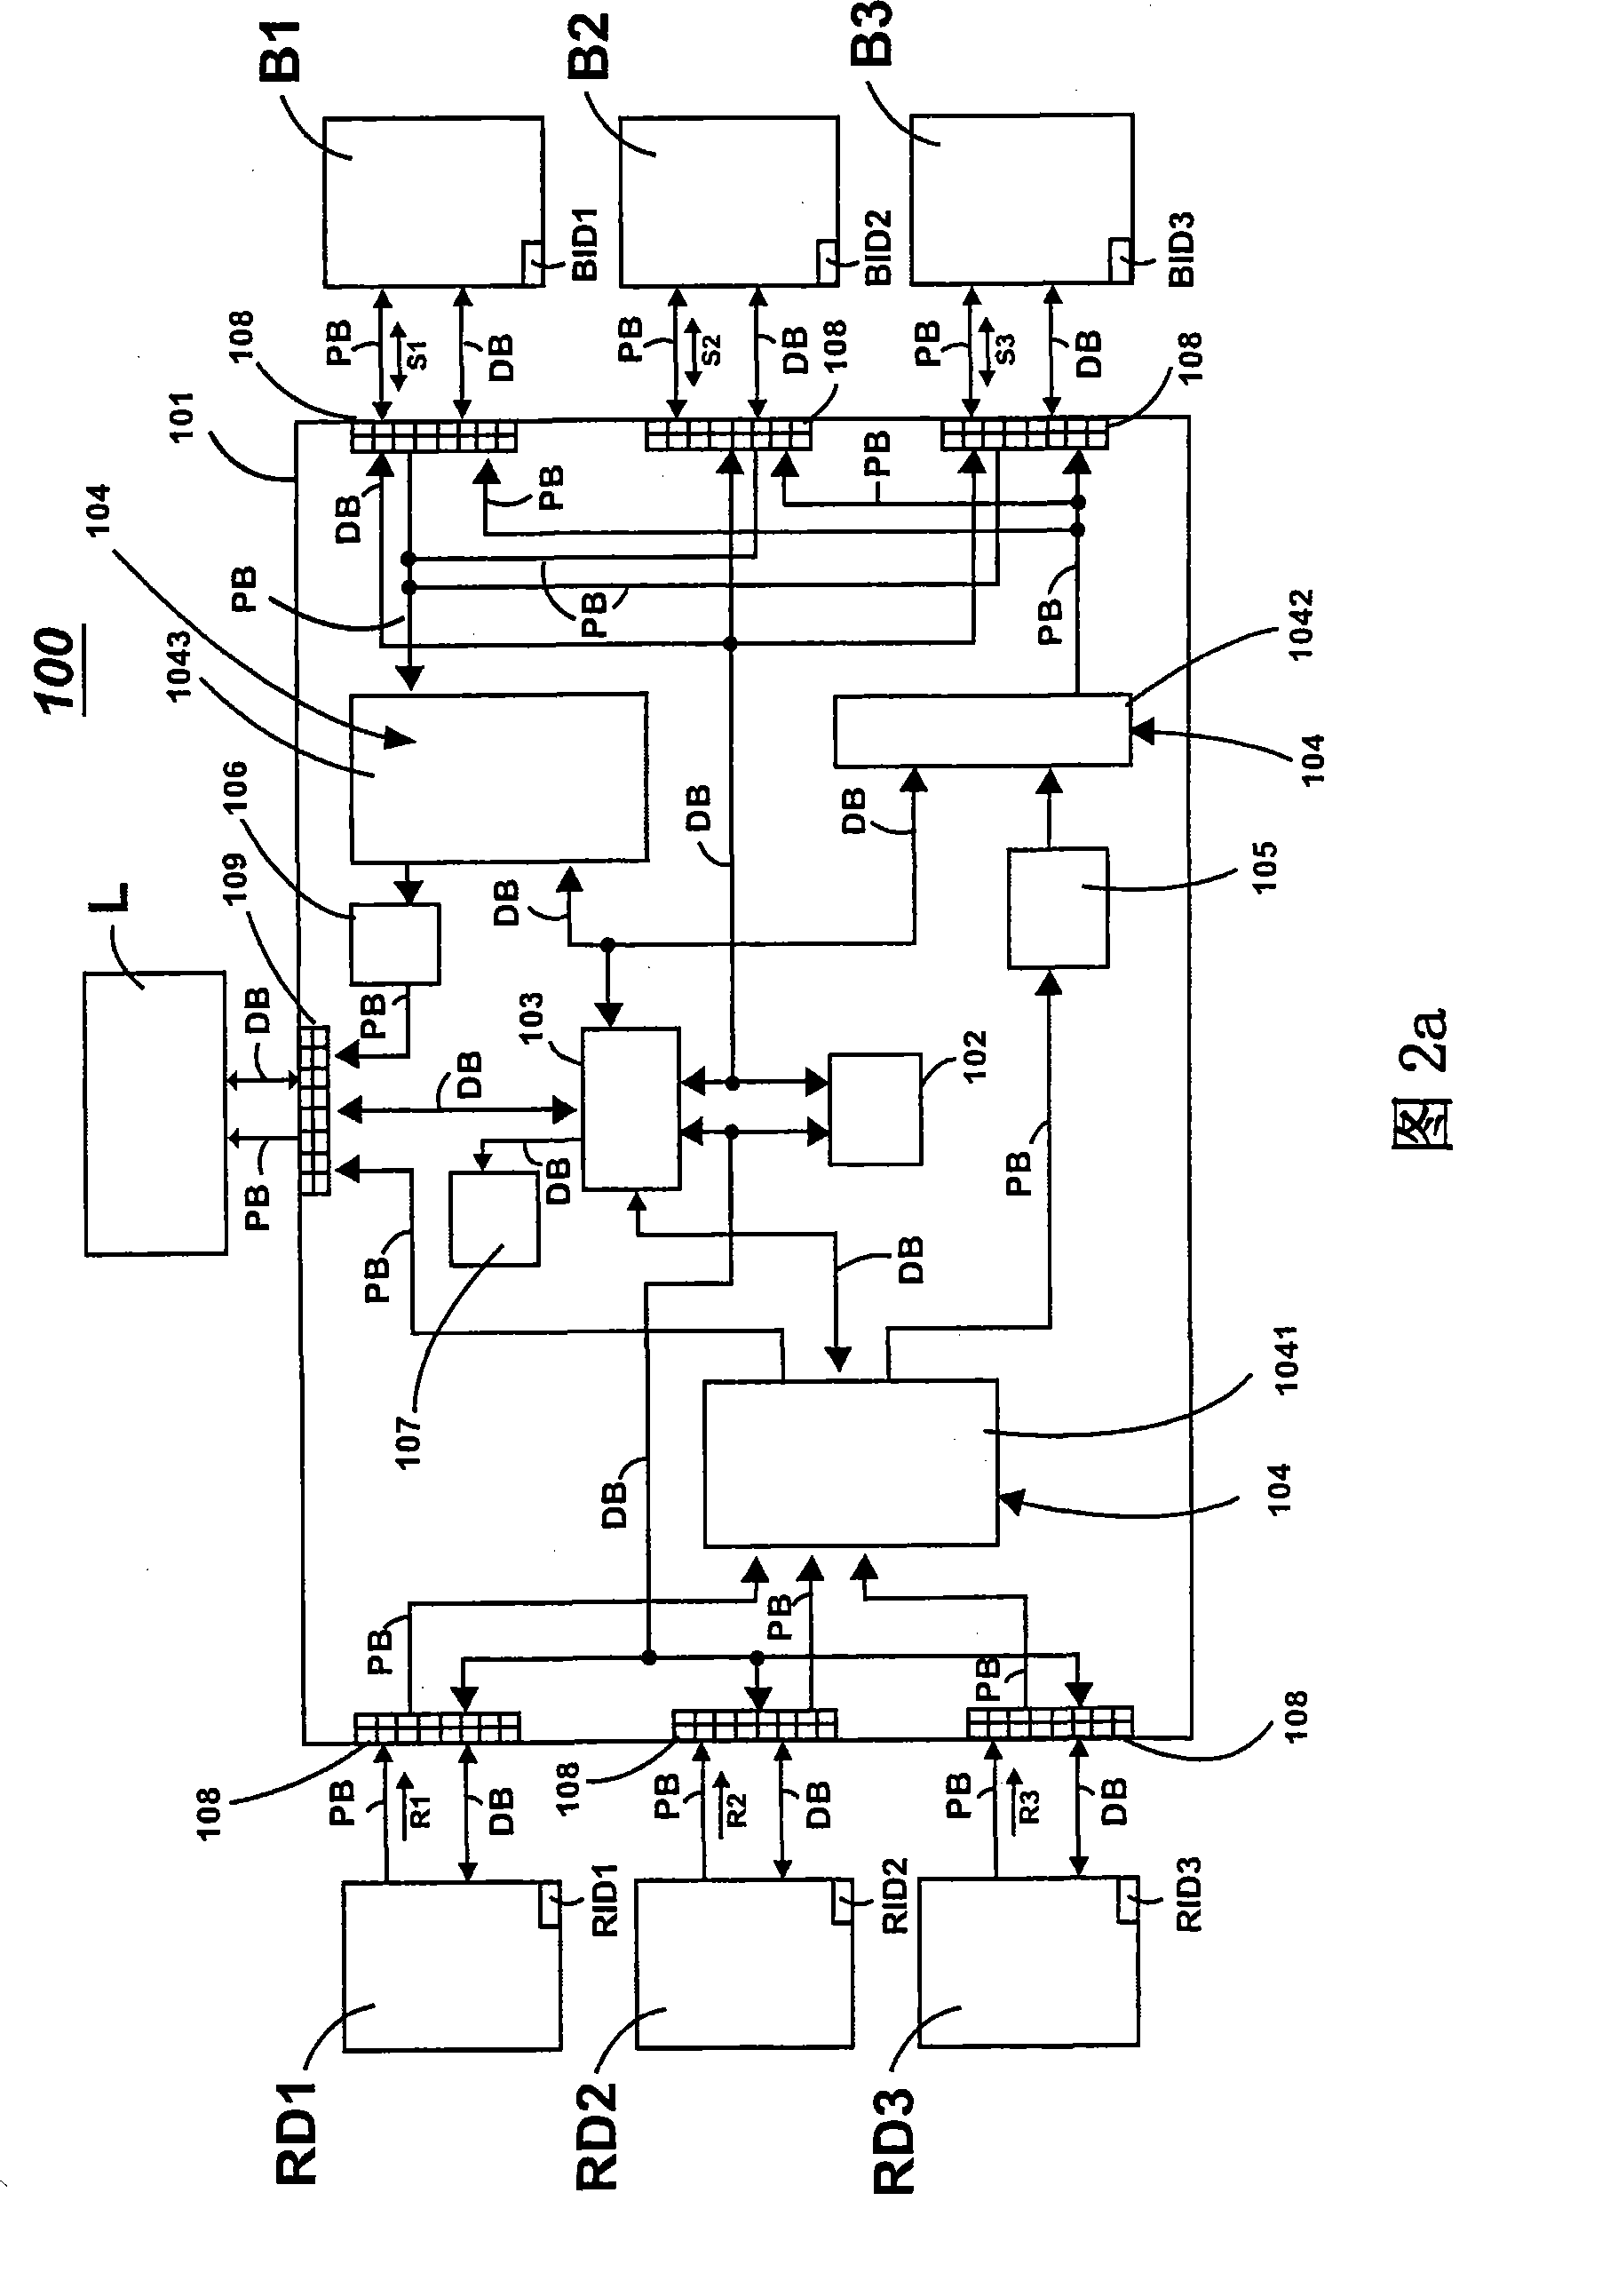 Multi-energy management system, device and applied method wherein